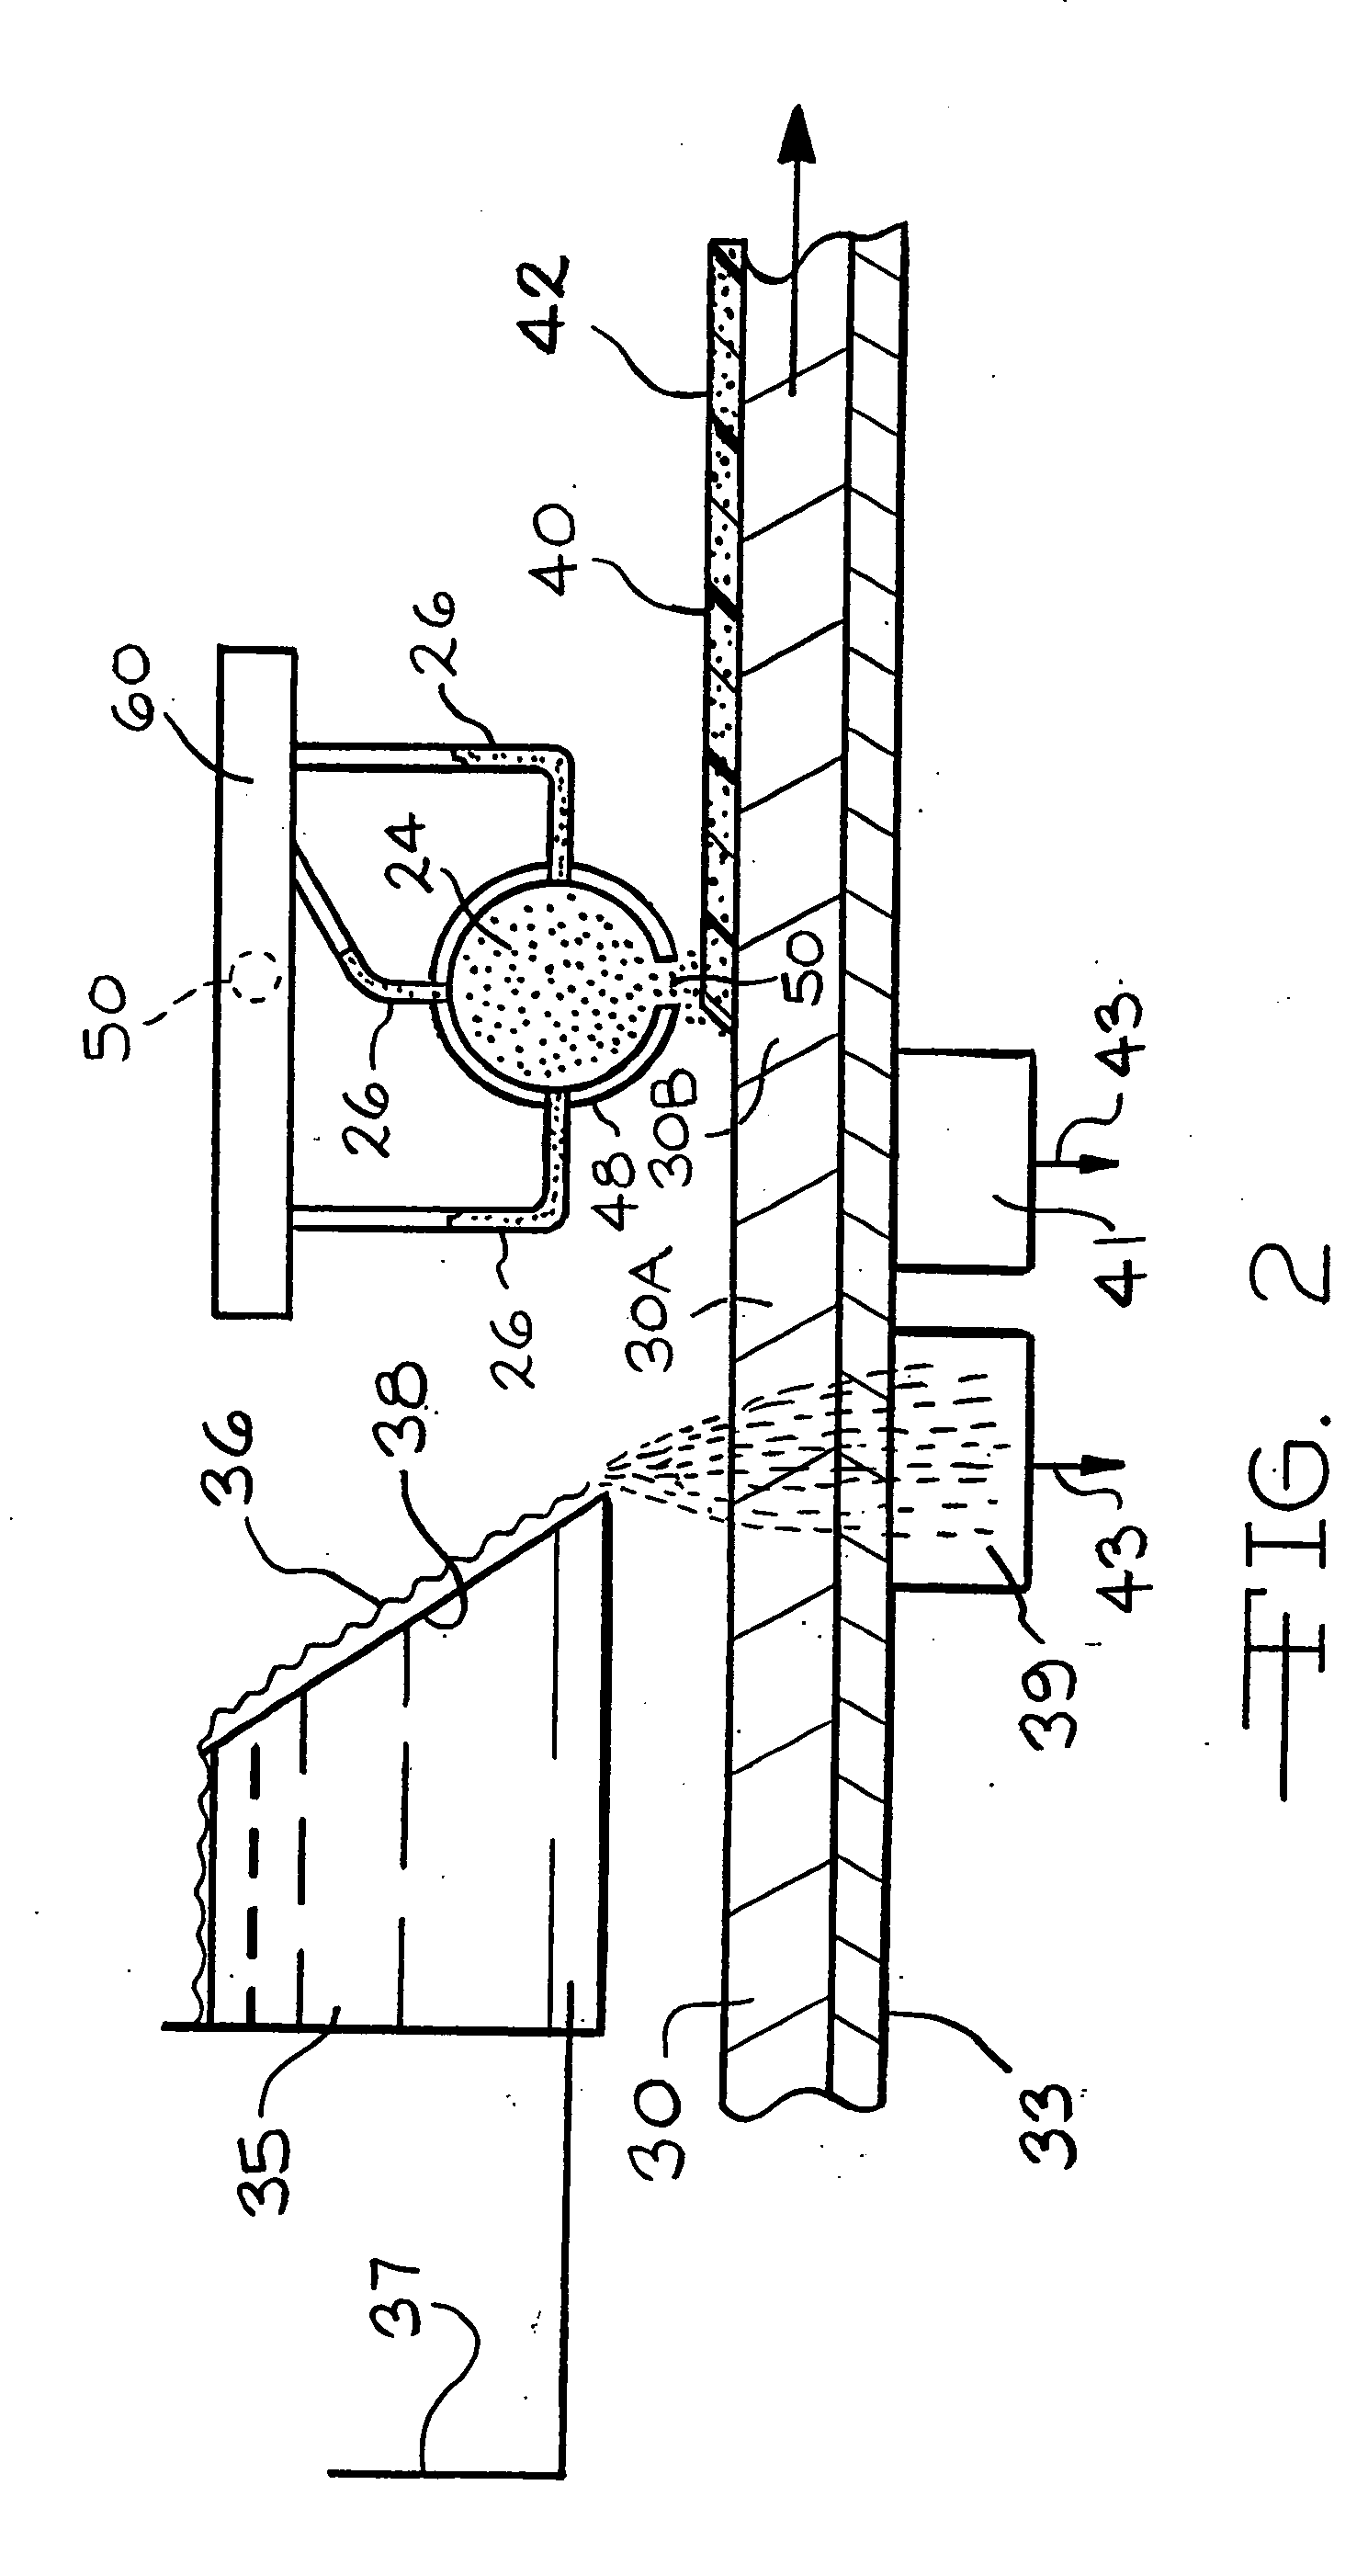 Method of making foam coated mat online and coated mat product